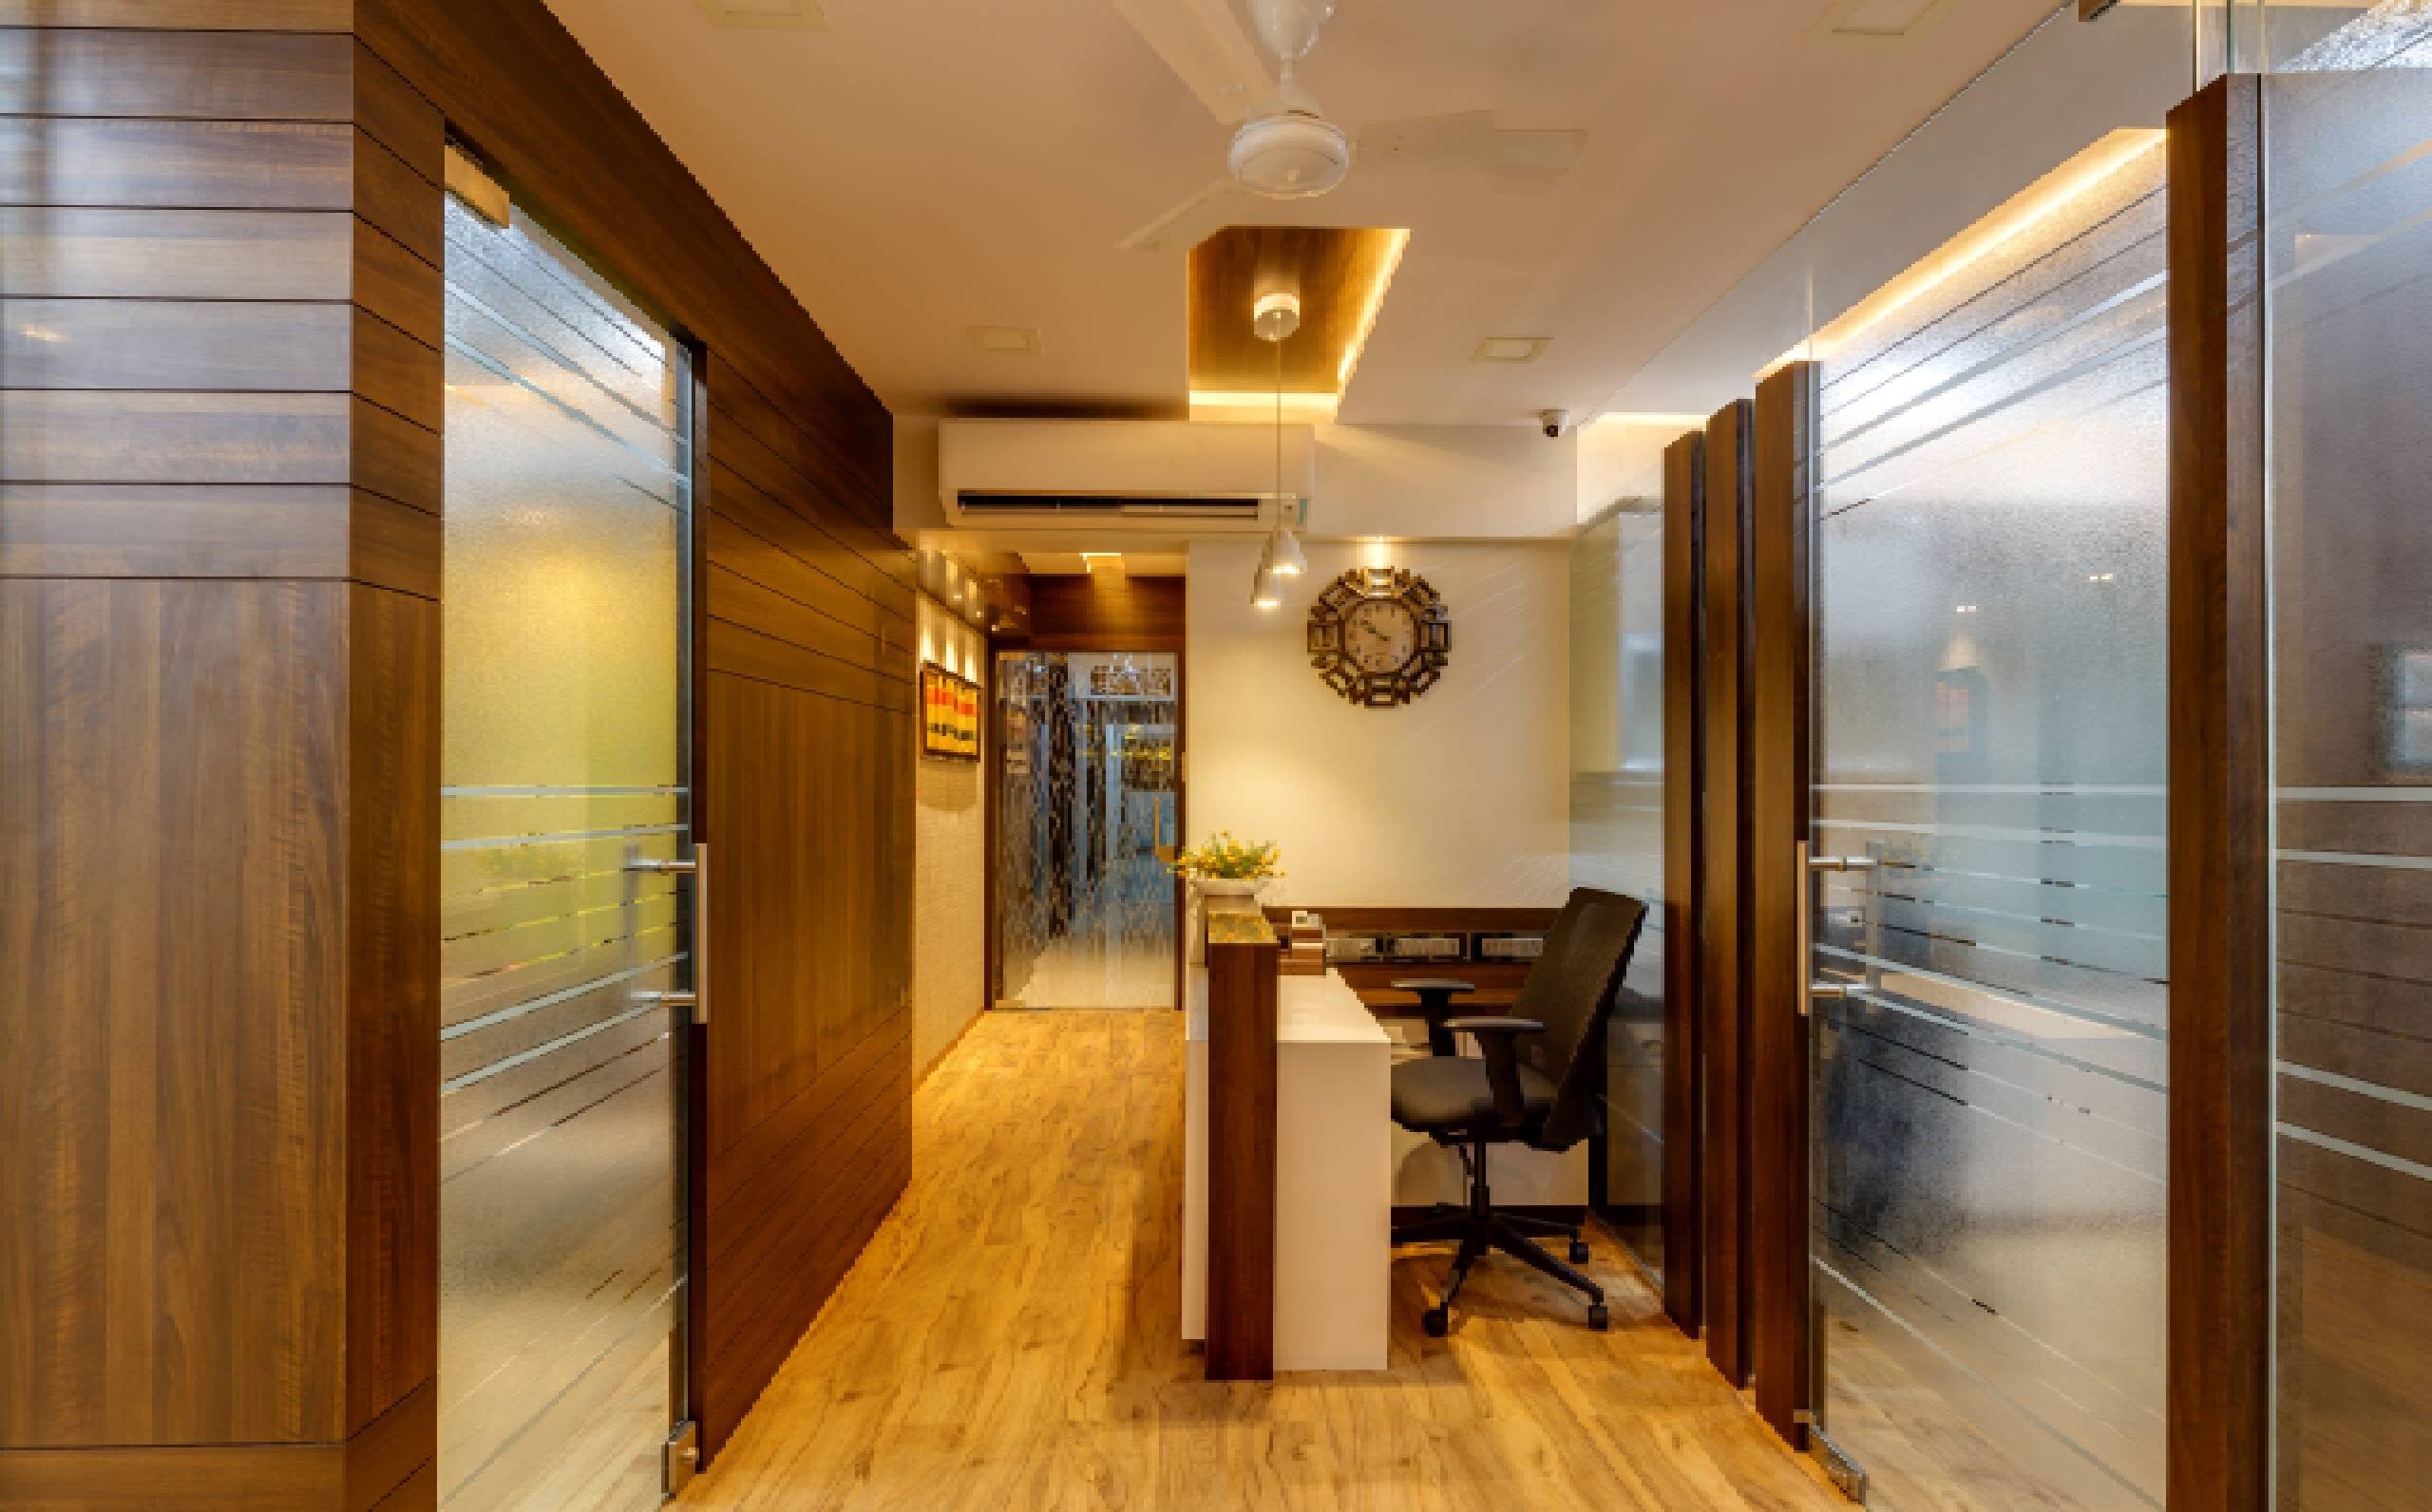 top architects in pune